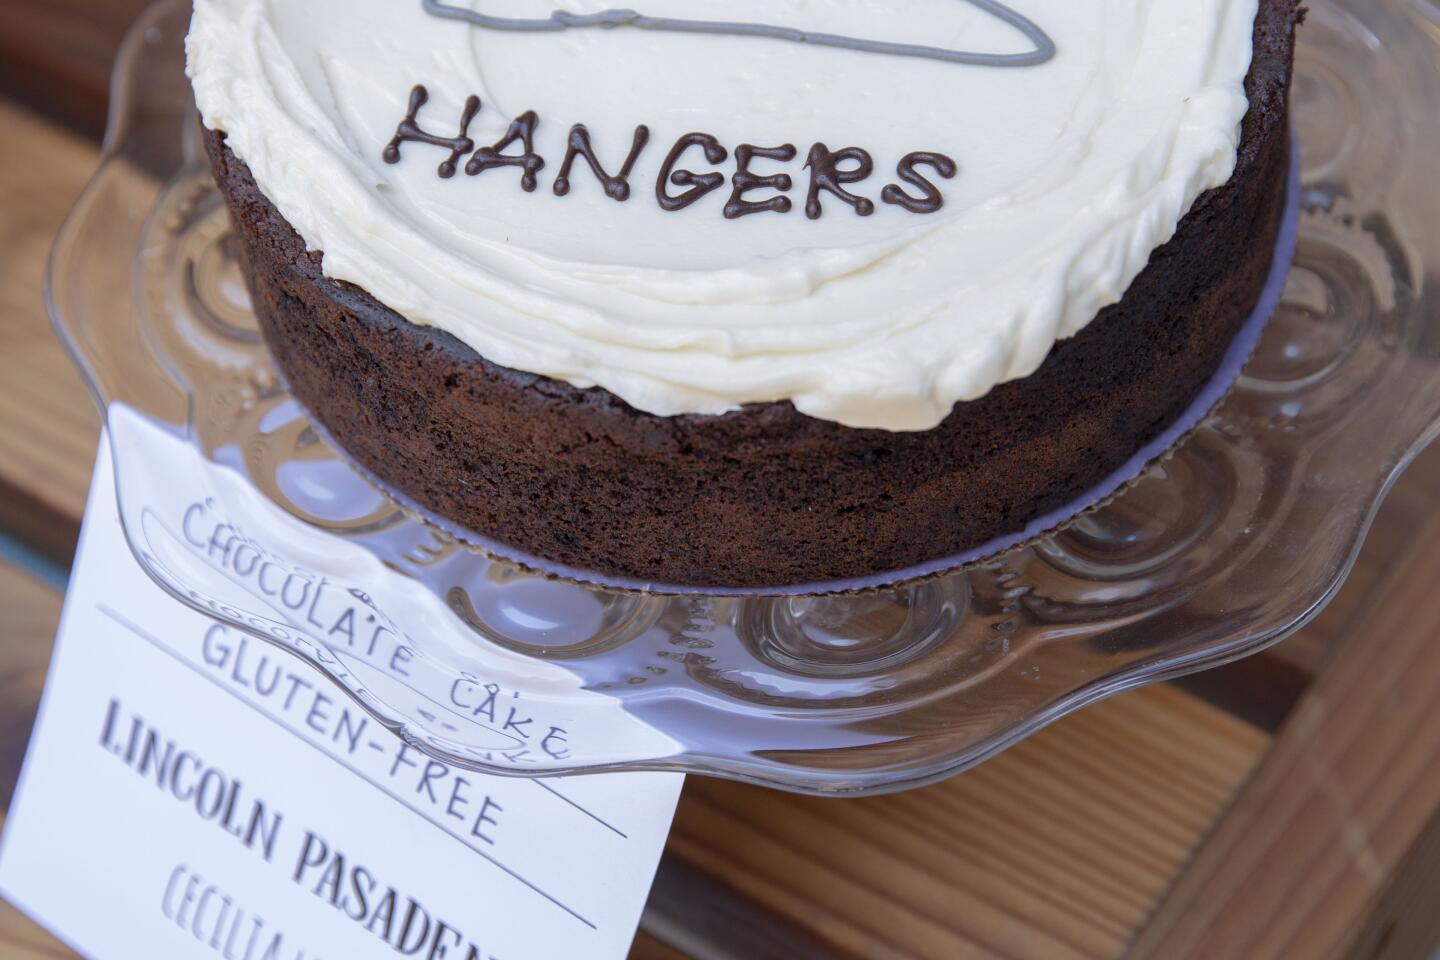 Chef Cecilia Leung of Lincoln in Pasadena offered a cake that was decorated to read "no more hangers."